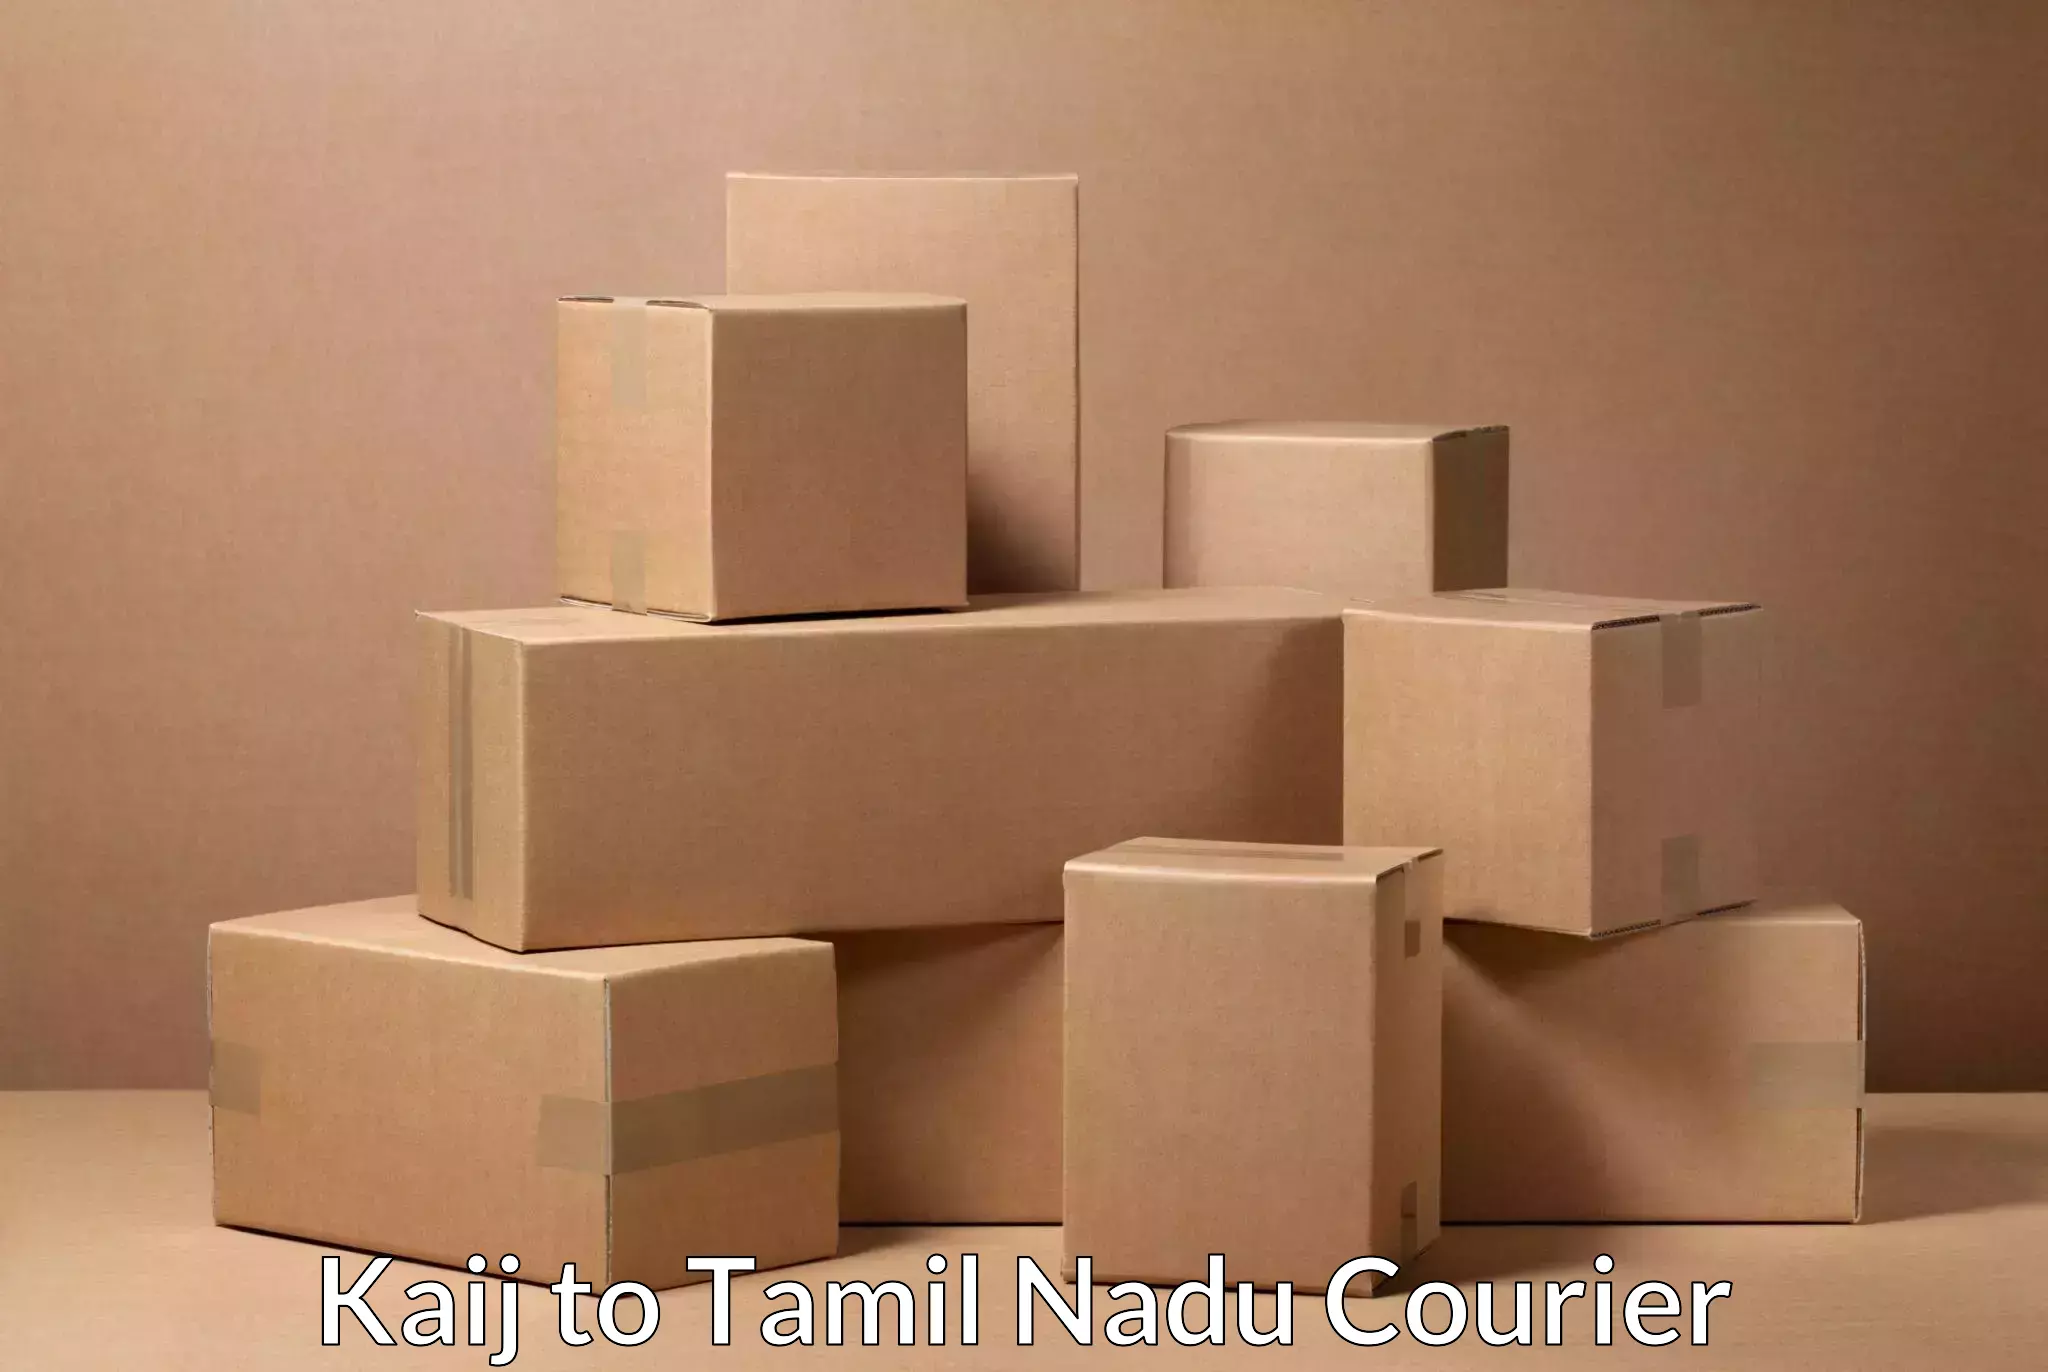 Reliable courier services Kaij to Ennore Port Chennai